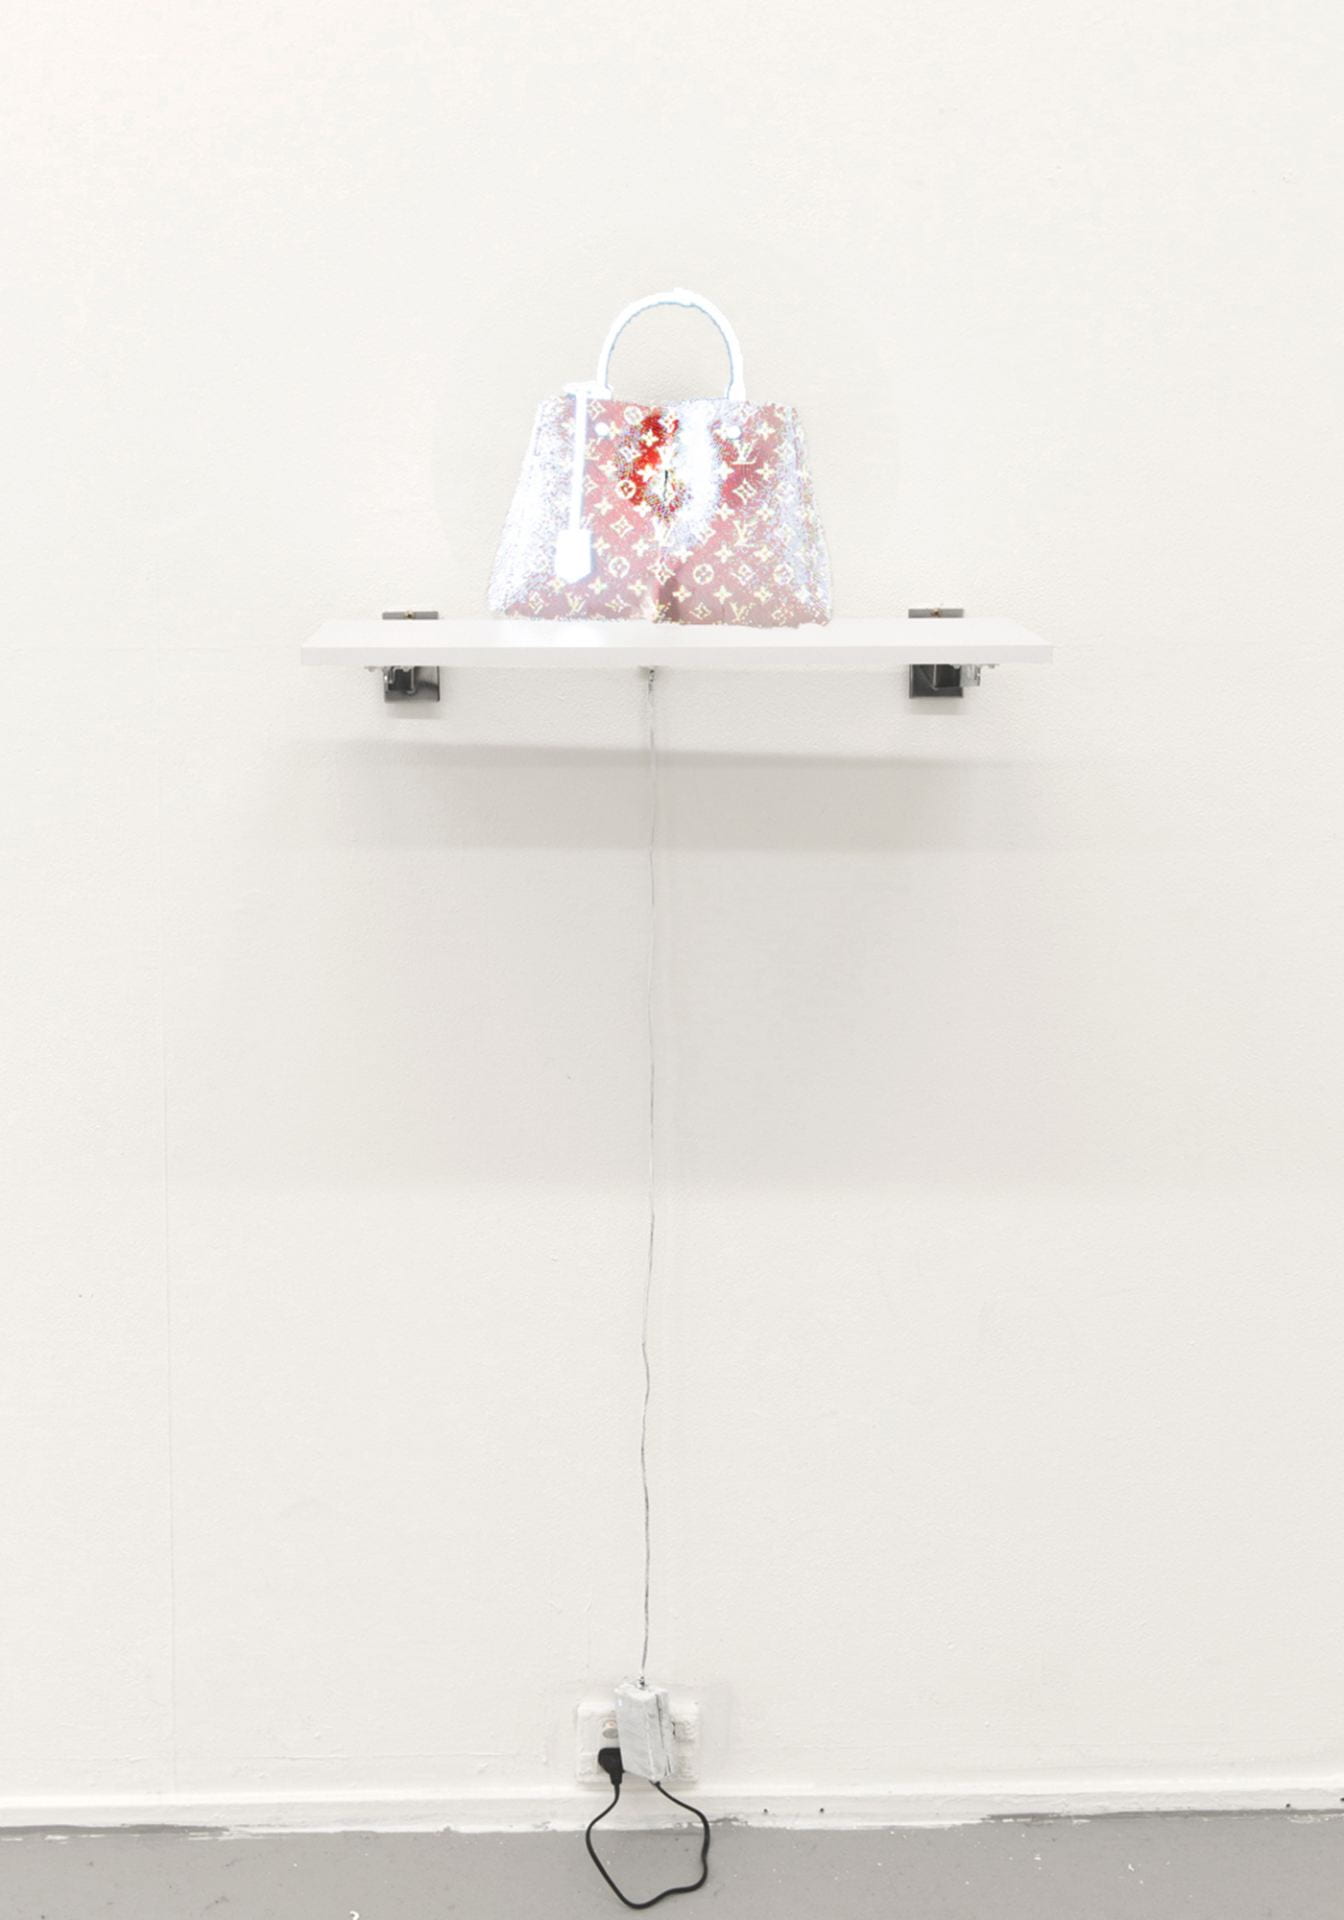 A hologram display of a louis vuitton Montaigne MM bag appears above a white shelf